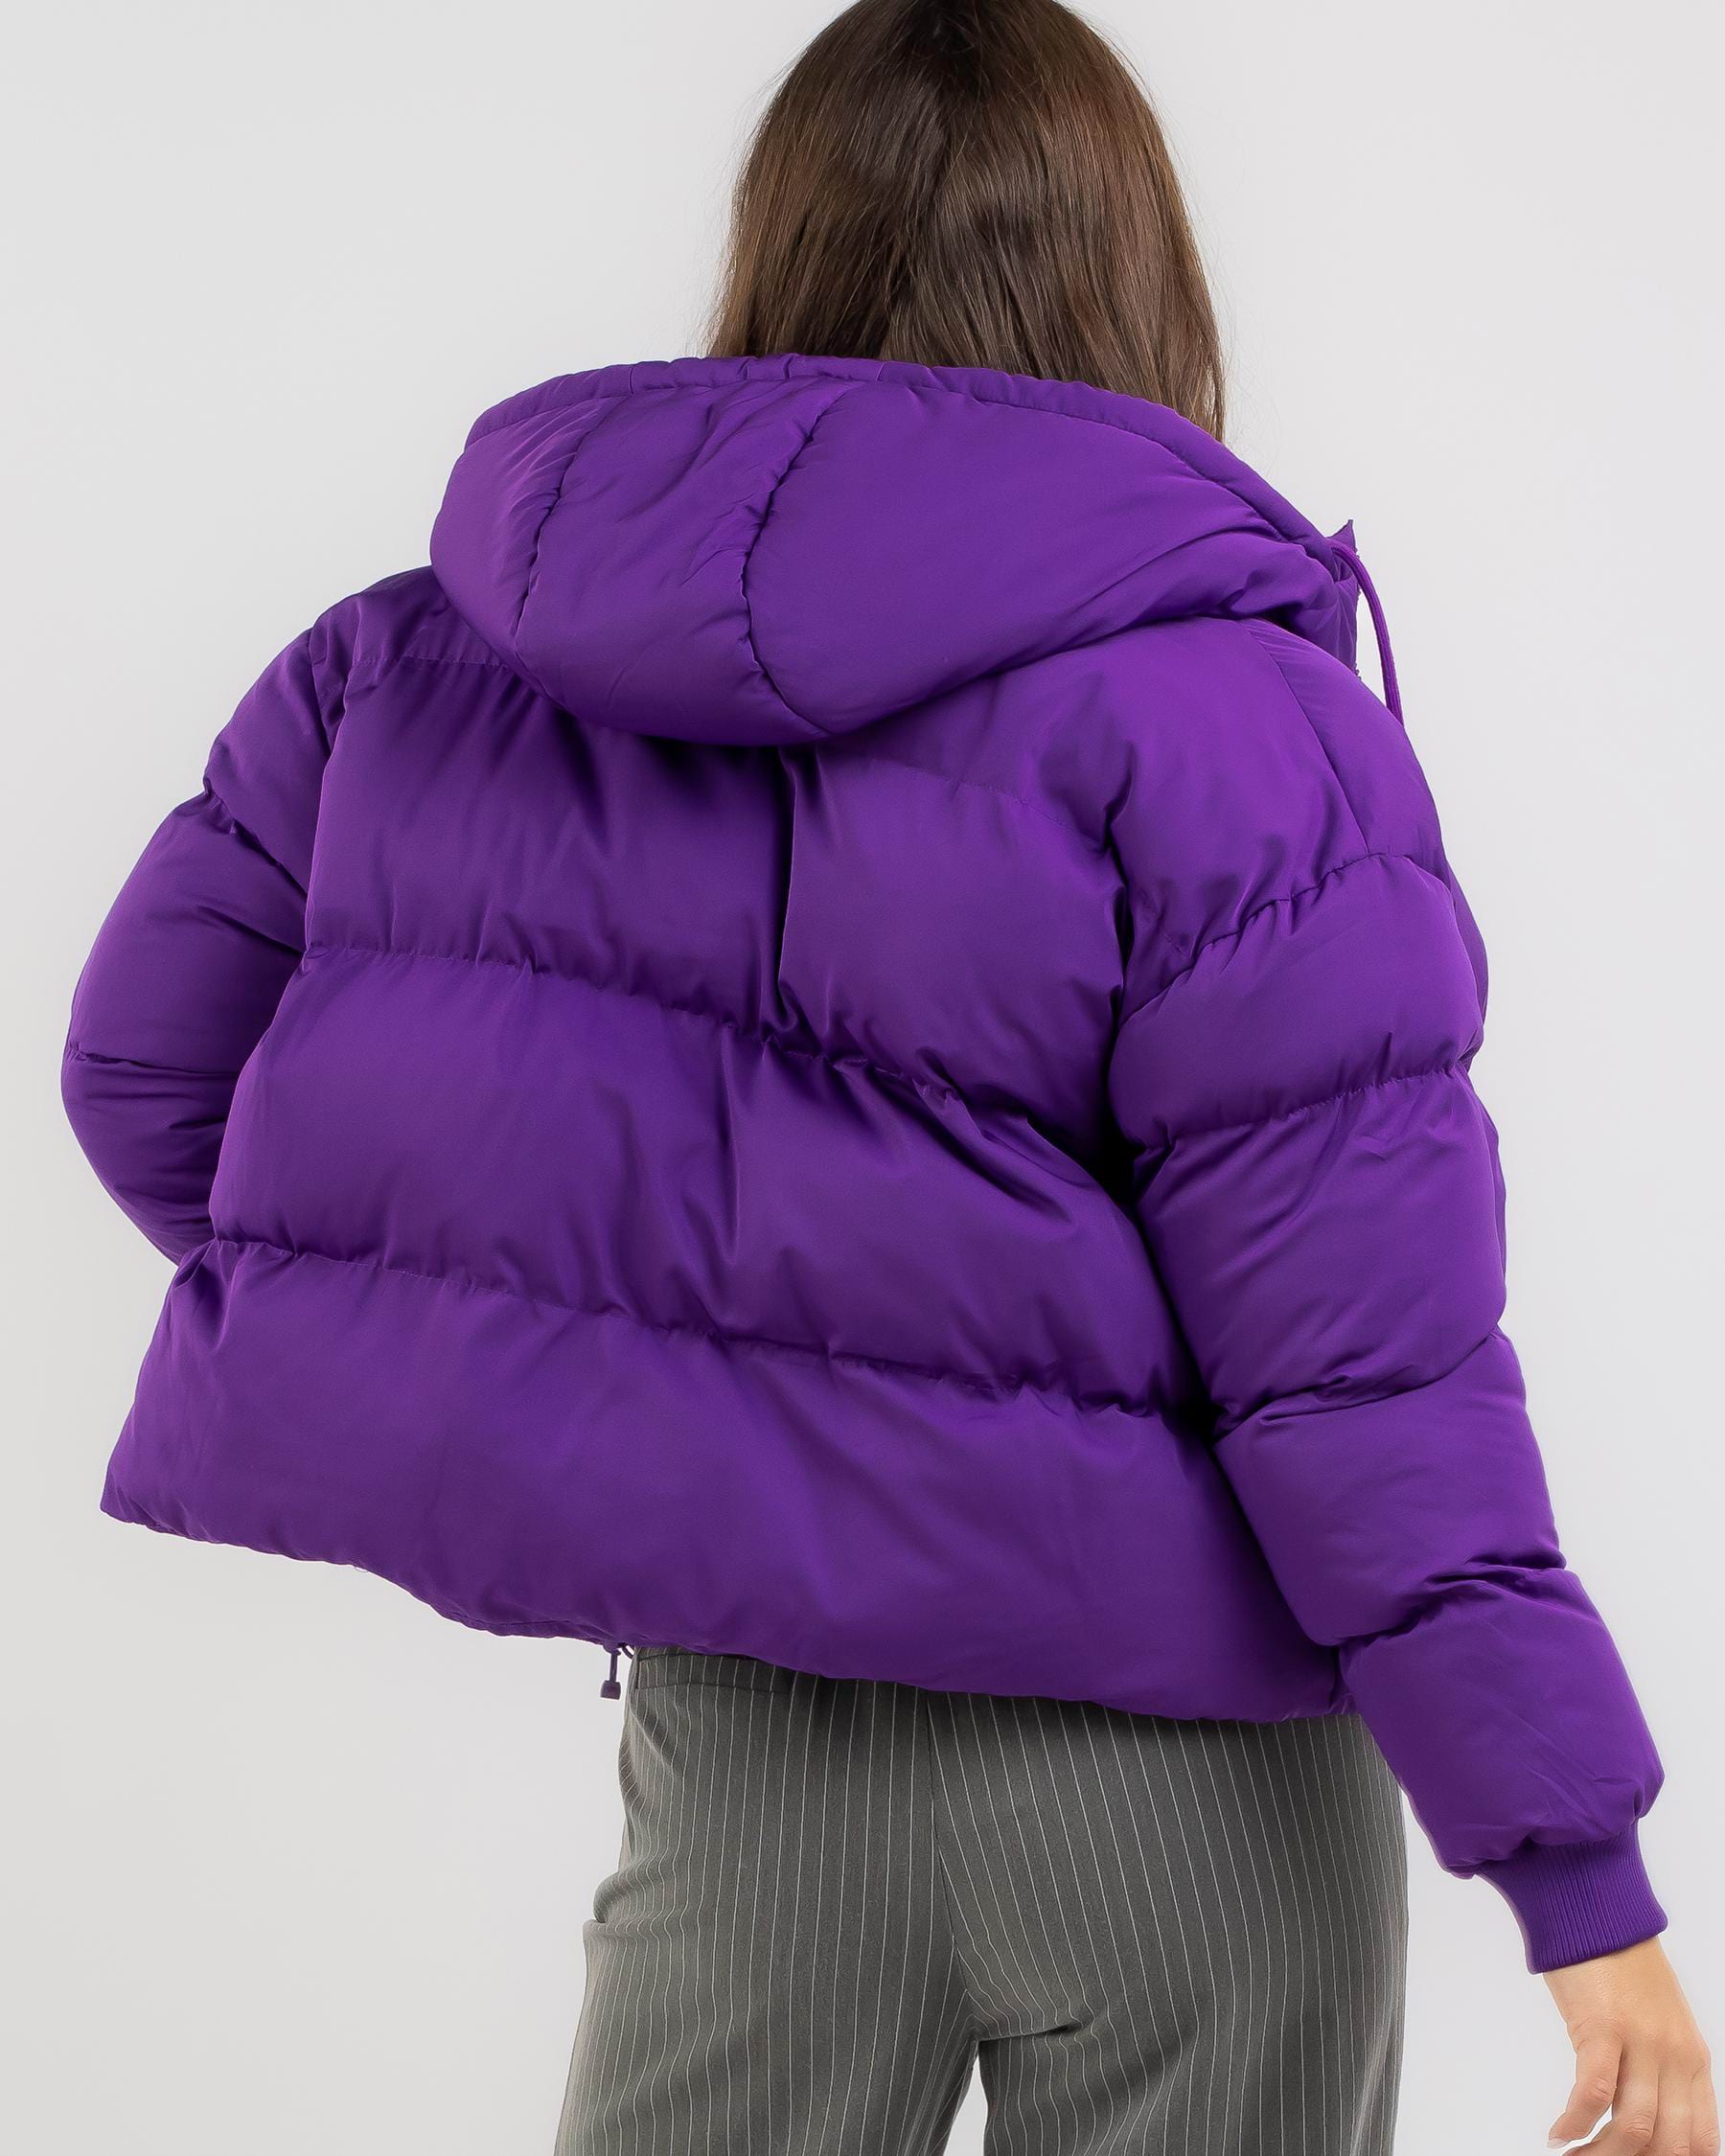 Stussy Graffiti Hooded Puffer Jacket In Bright Violet - Fast Shipping ...